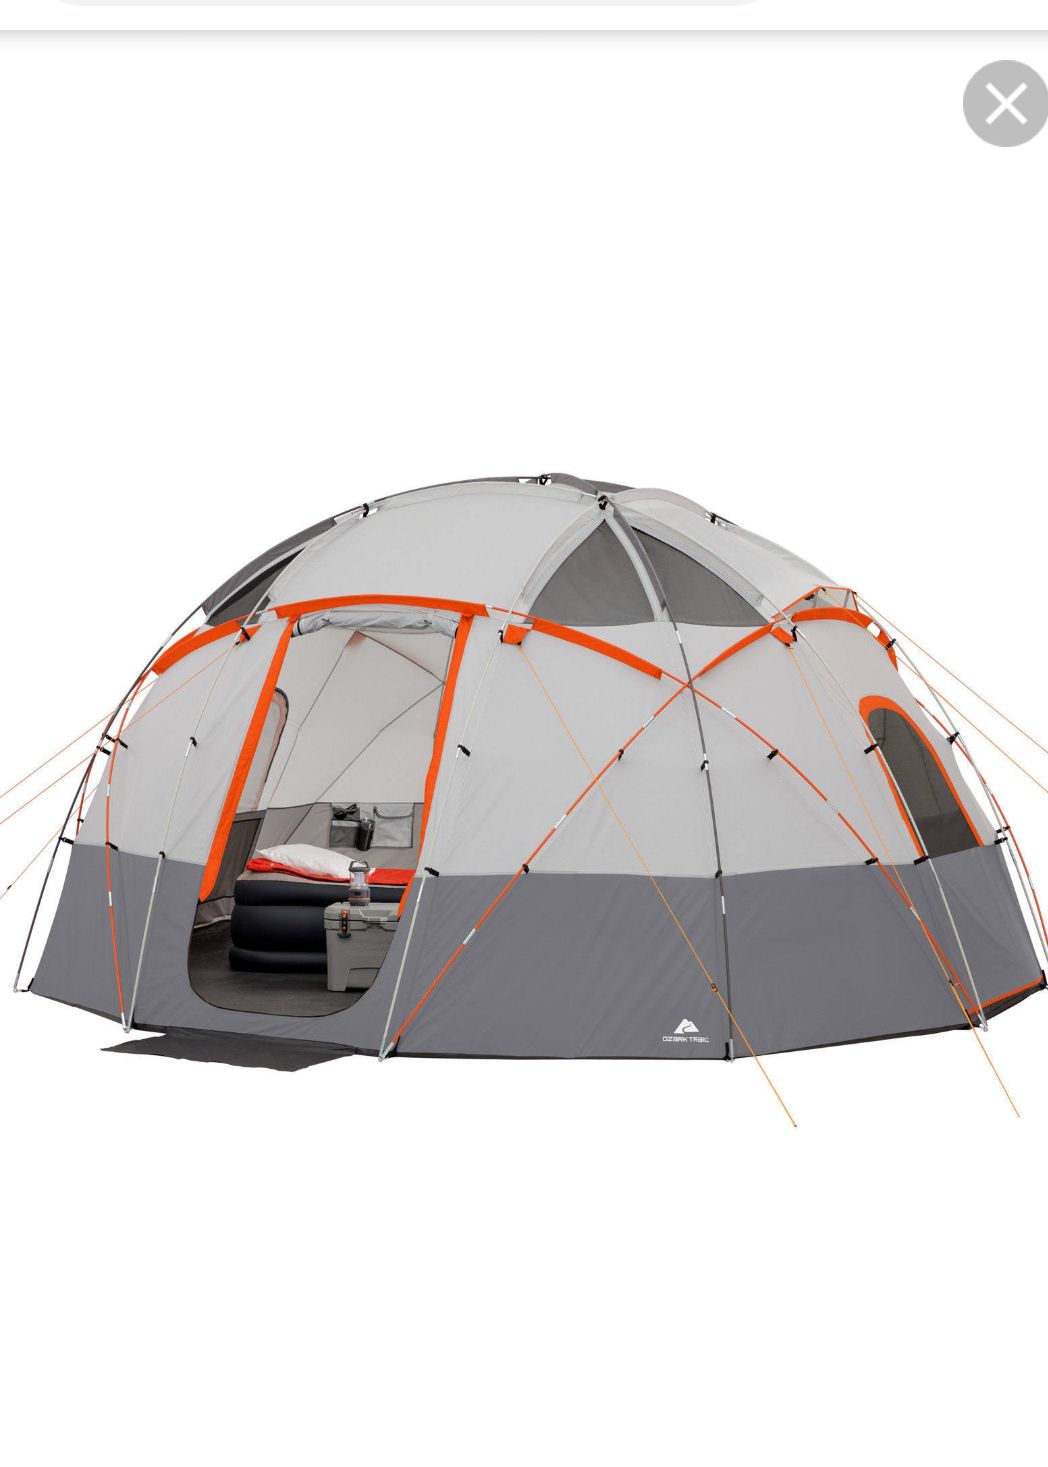 Ozark Trail 12 person Basecamp Tent with Built in LED lights